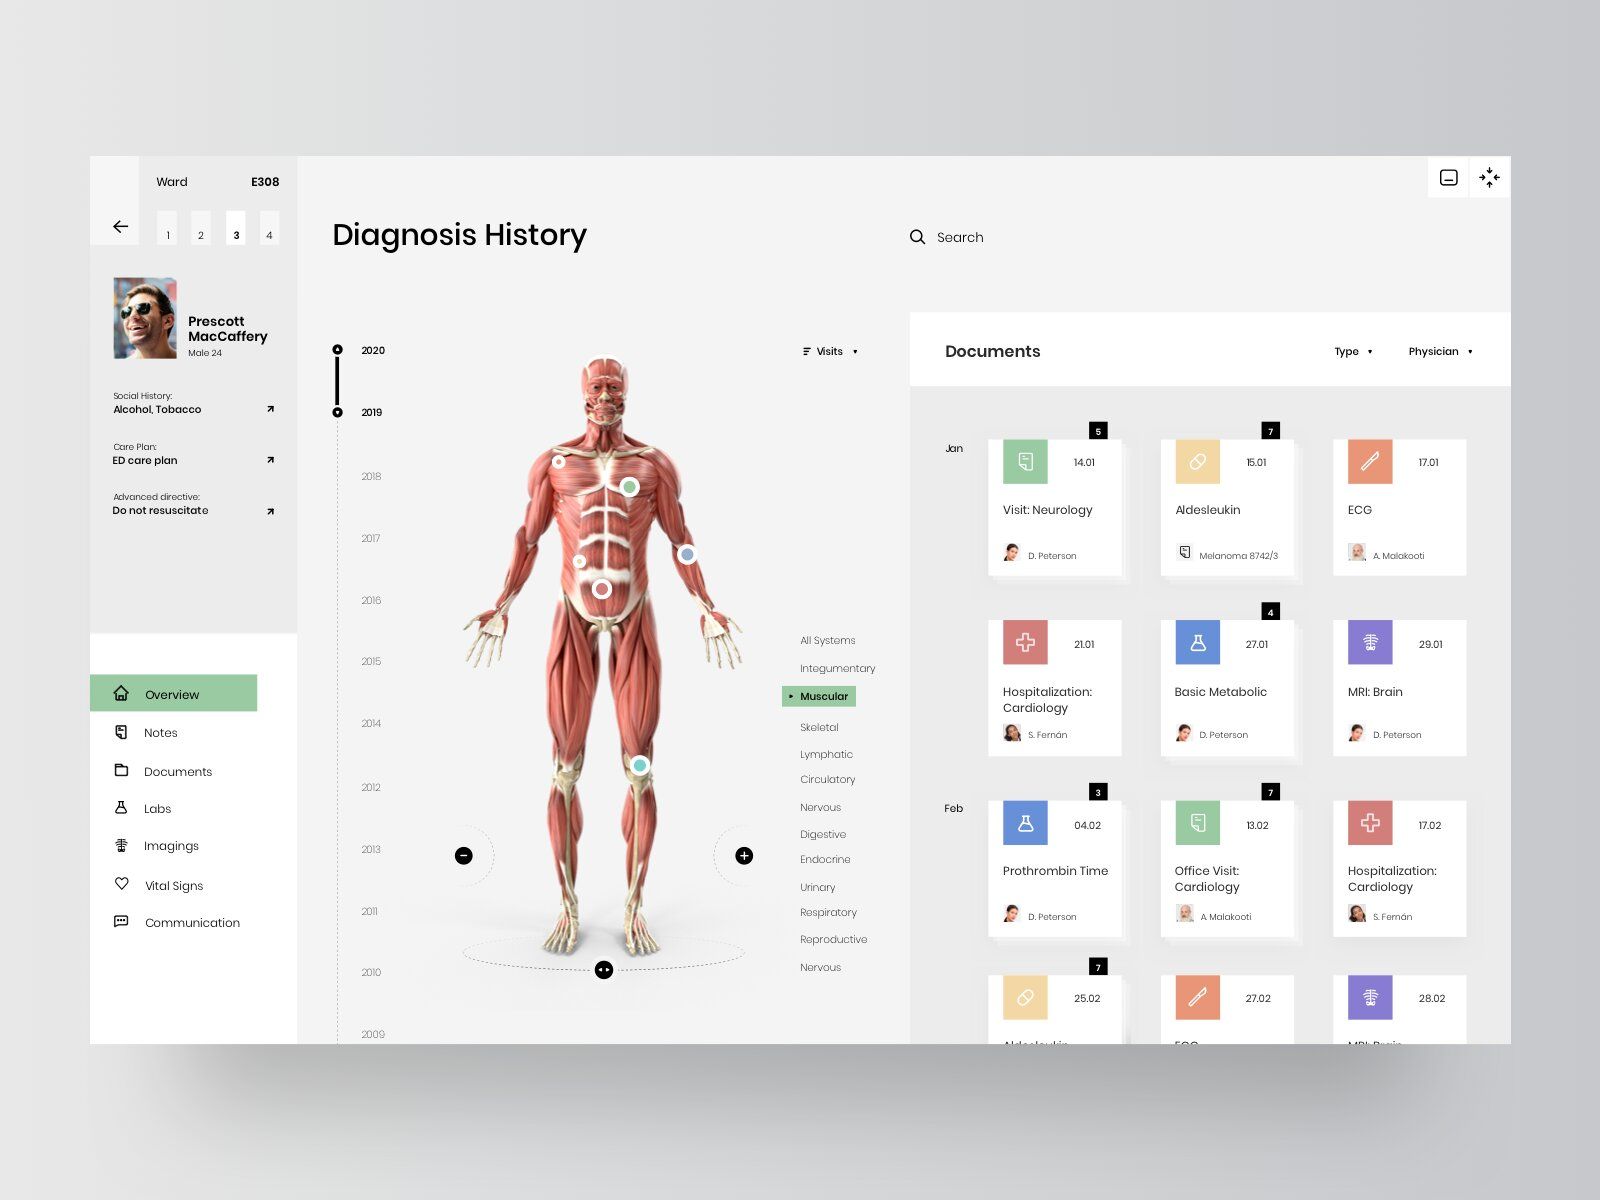 Diagnosis history is an important part of telehealth apps (*image by [RD UX/UI](https://dribbble.com/rondesignlabuxui){ rel="nofollow" .default-md}*)